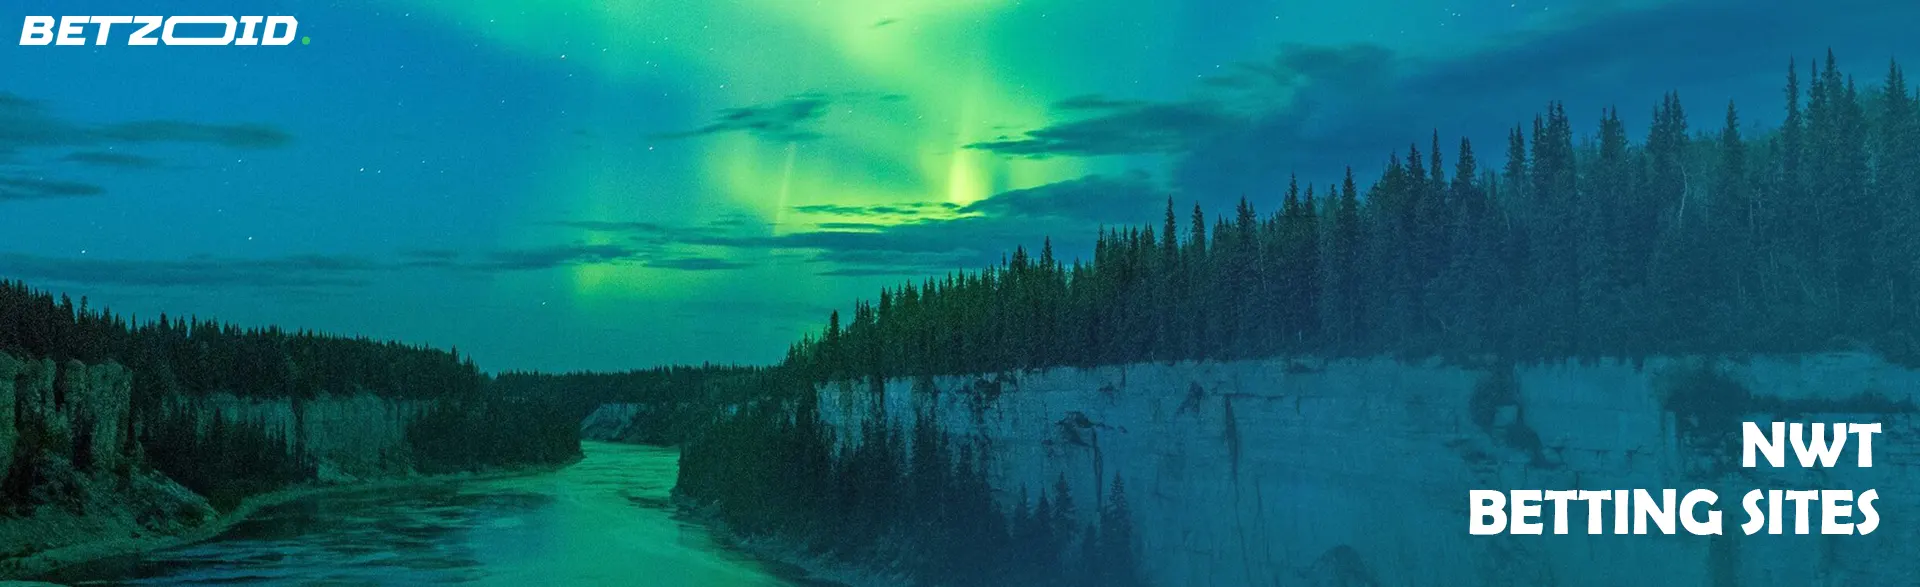 Scenic view of the Northern Lights over a forest and river, representing NWT betting sites.